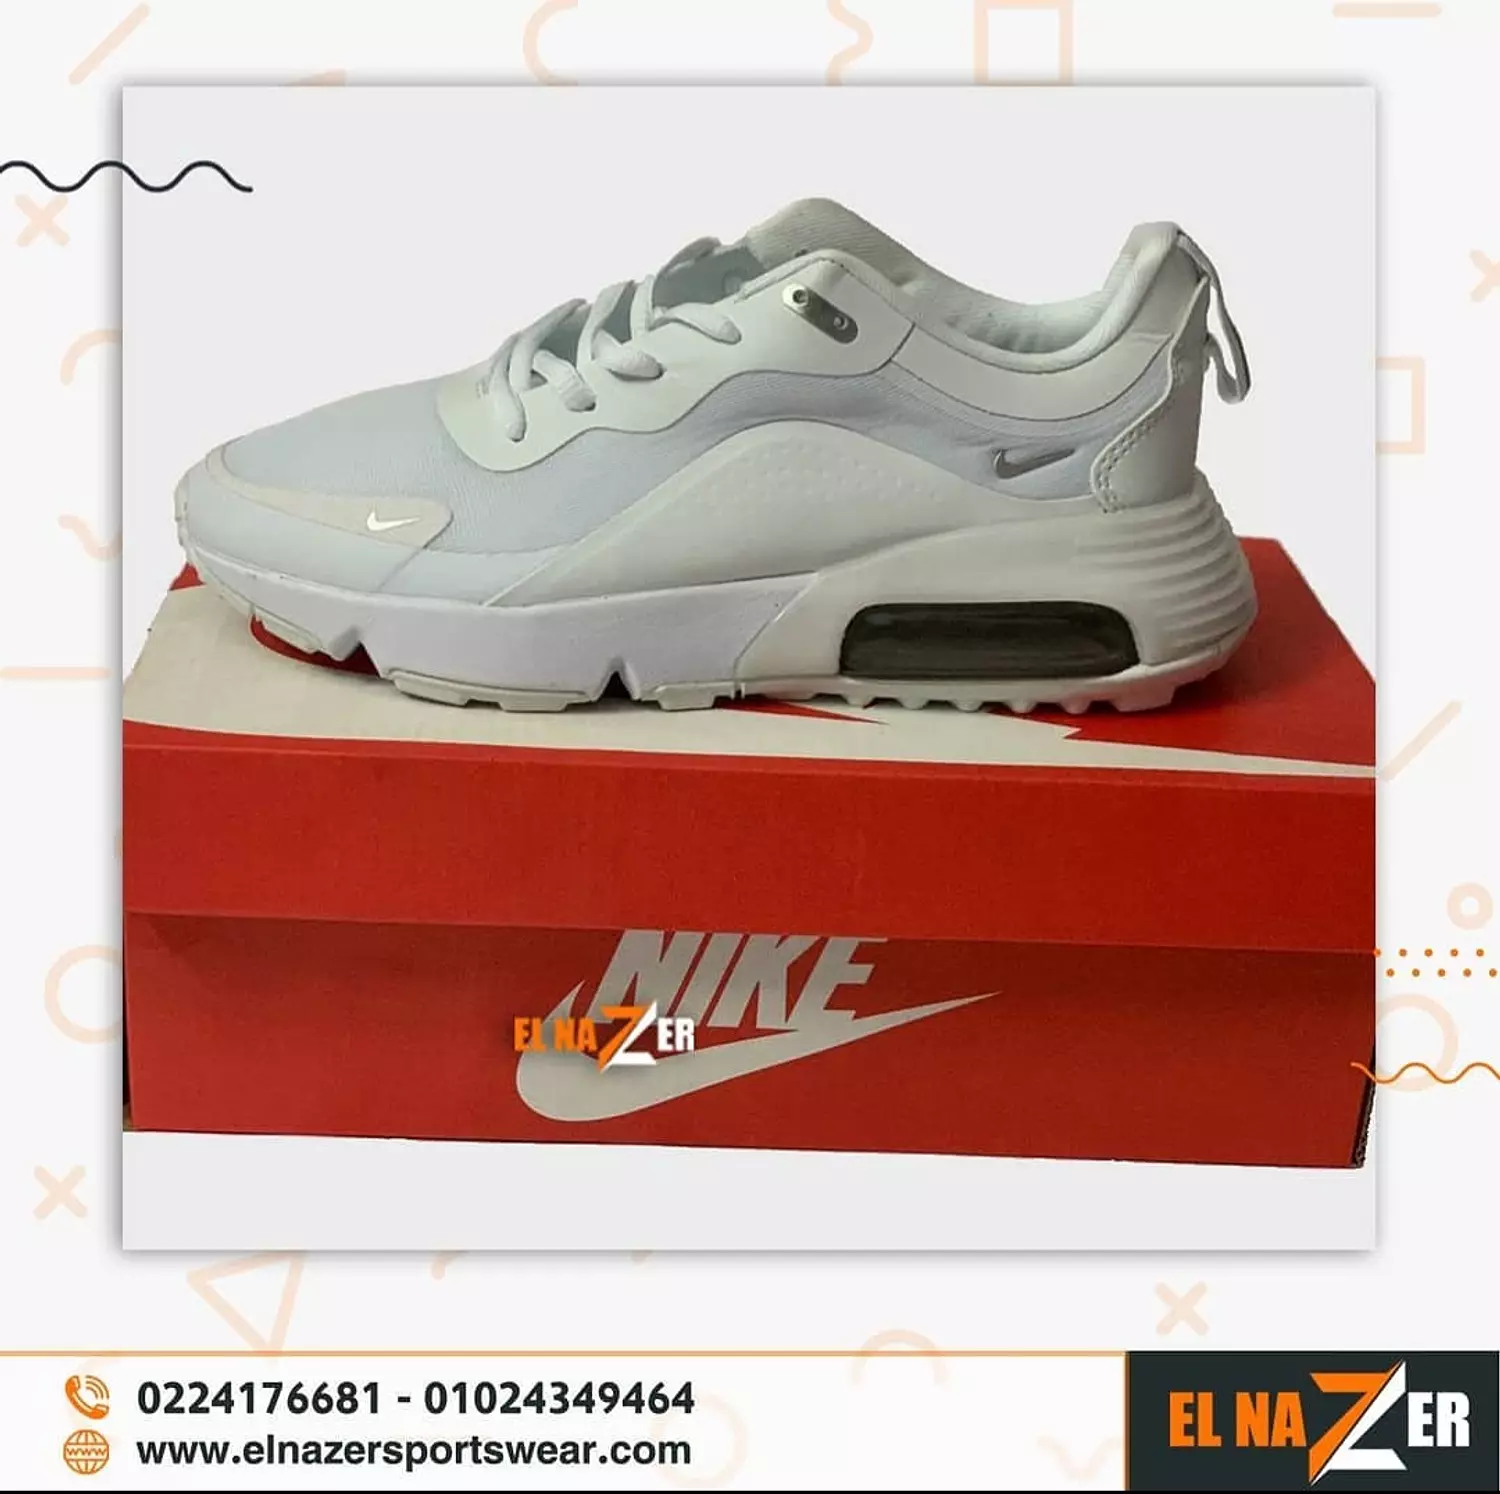 NIKE AIRMAX - RUNNING SHOES hover image